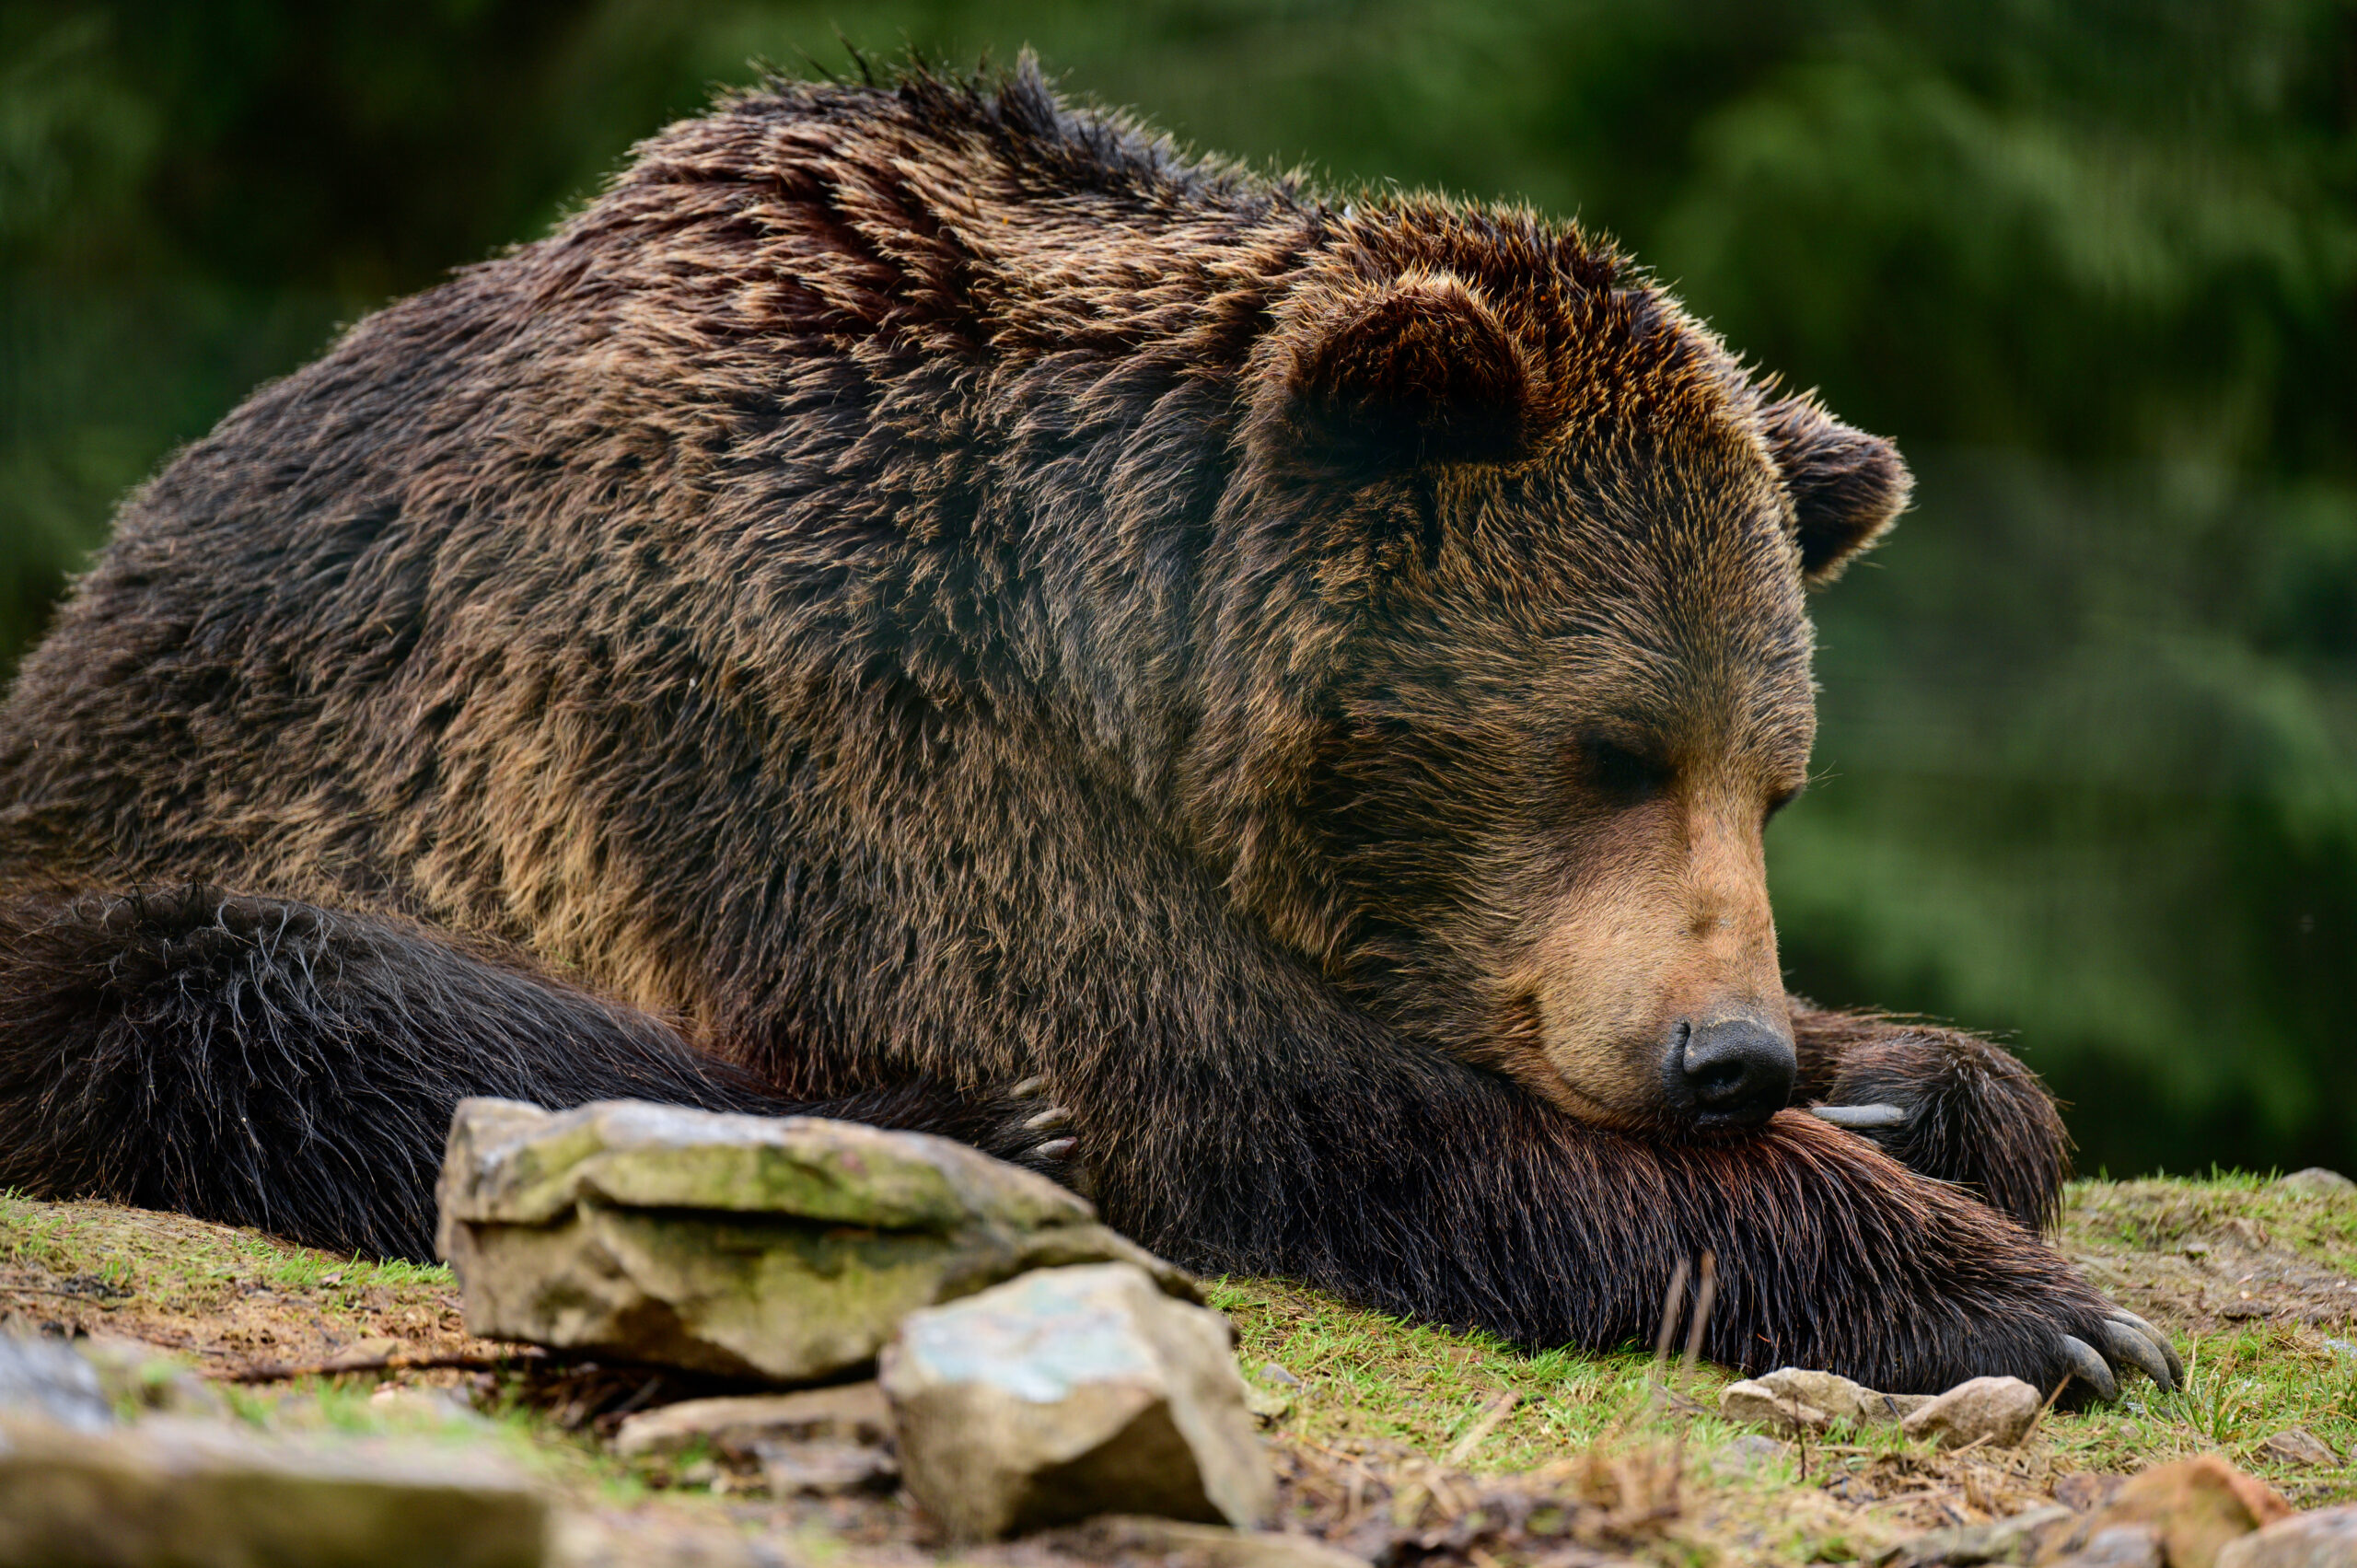 Now we know why hibernating bears don’t get blood clots